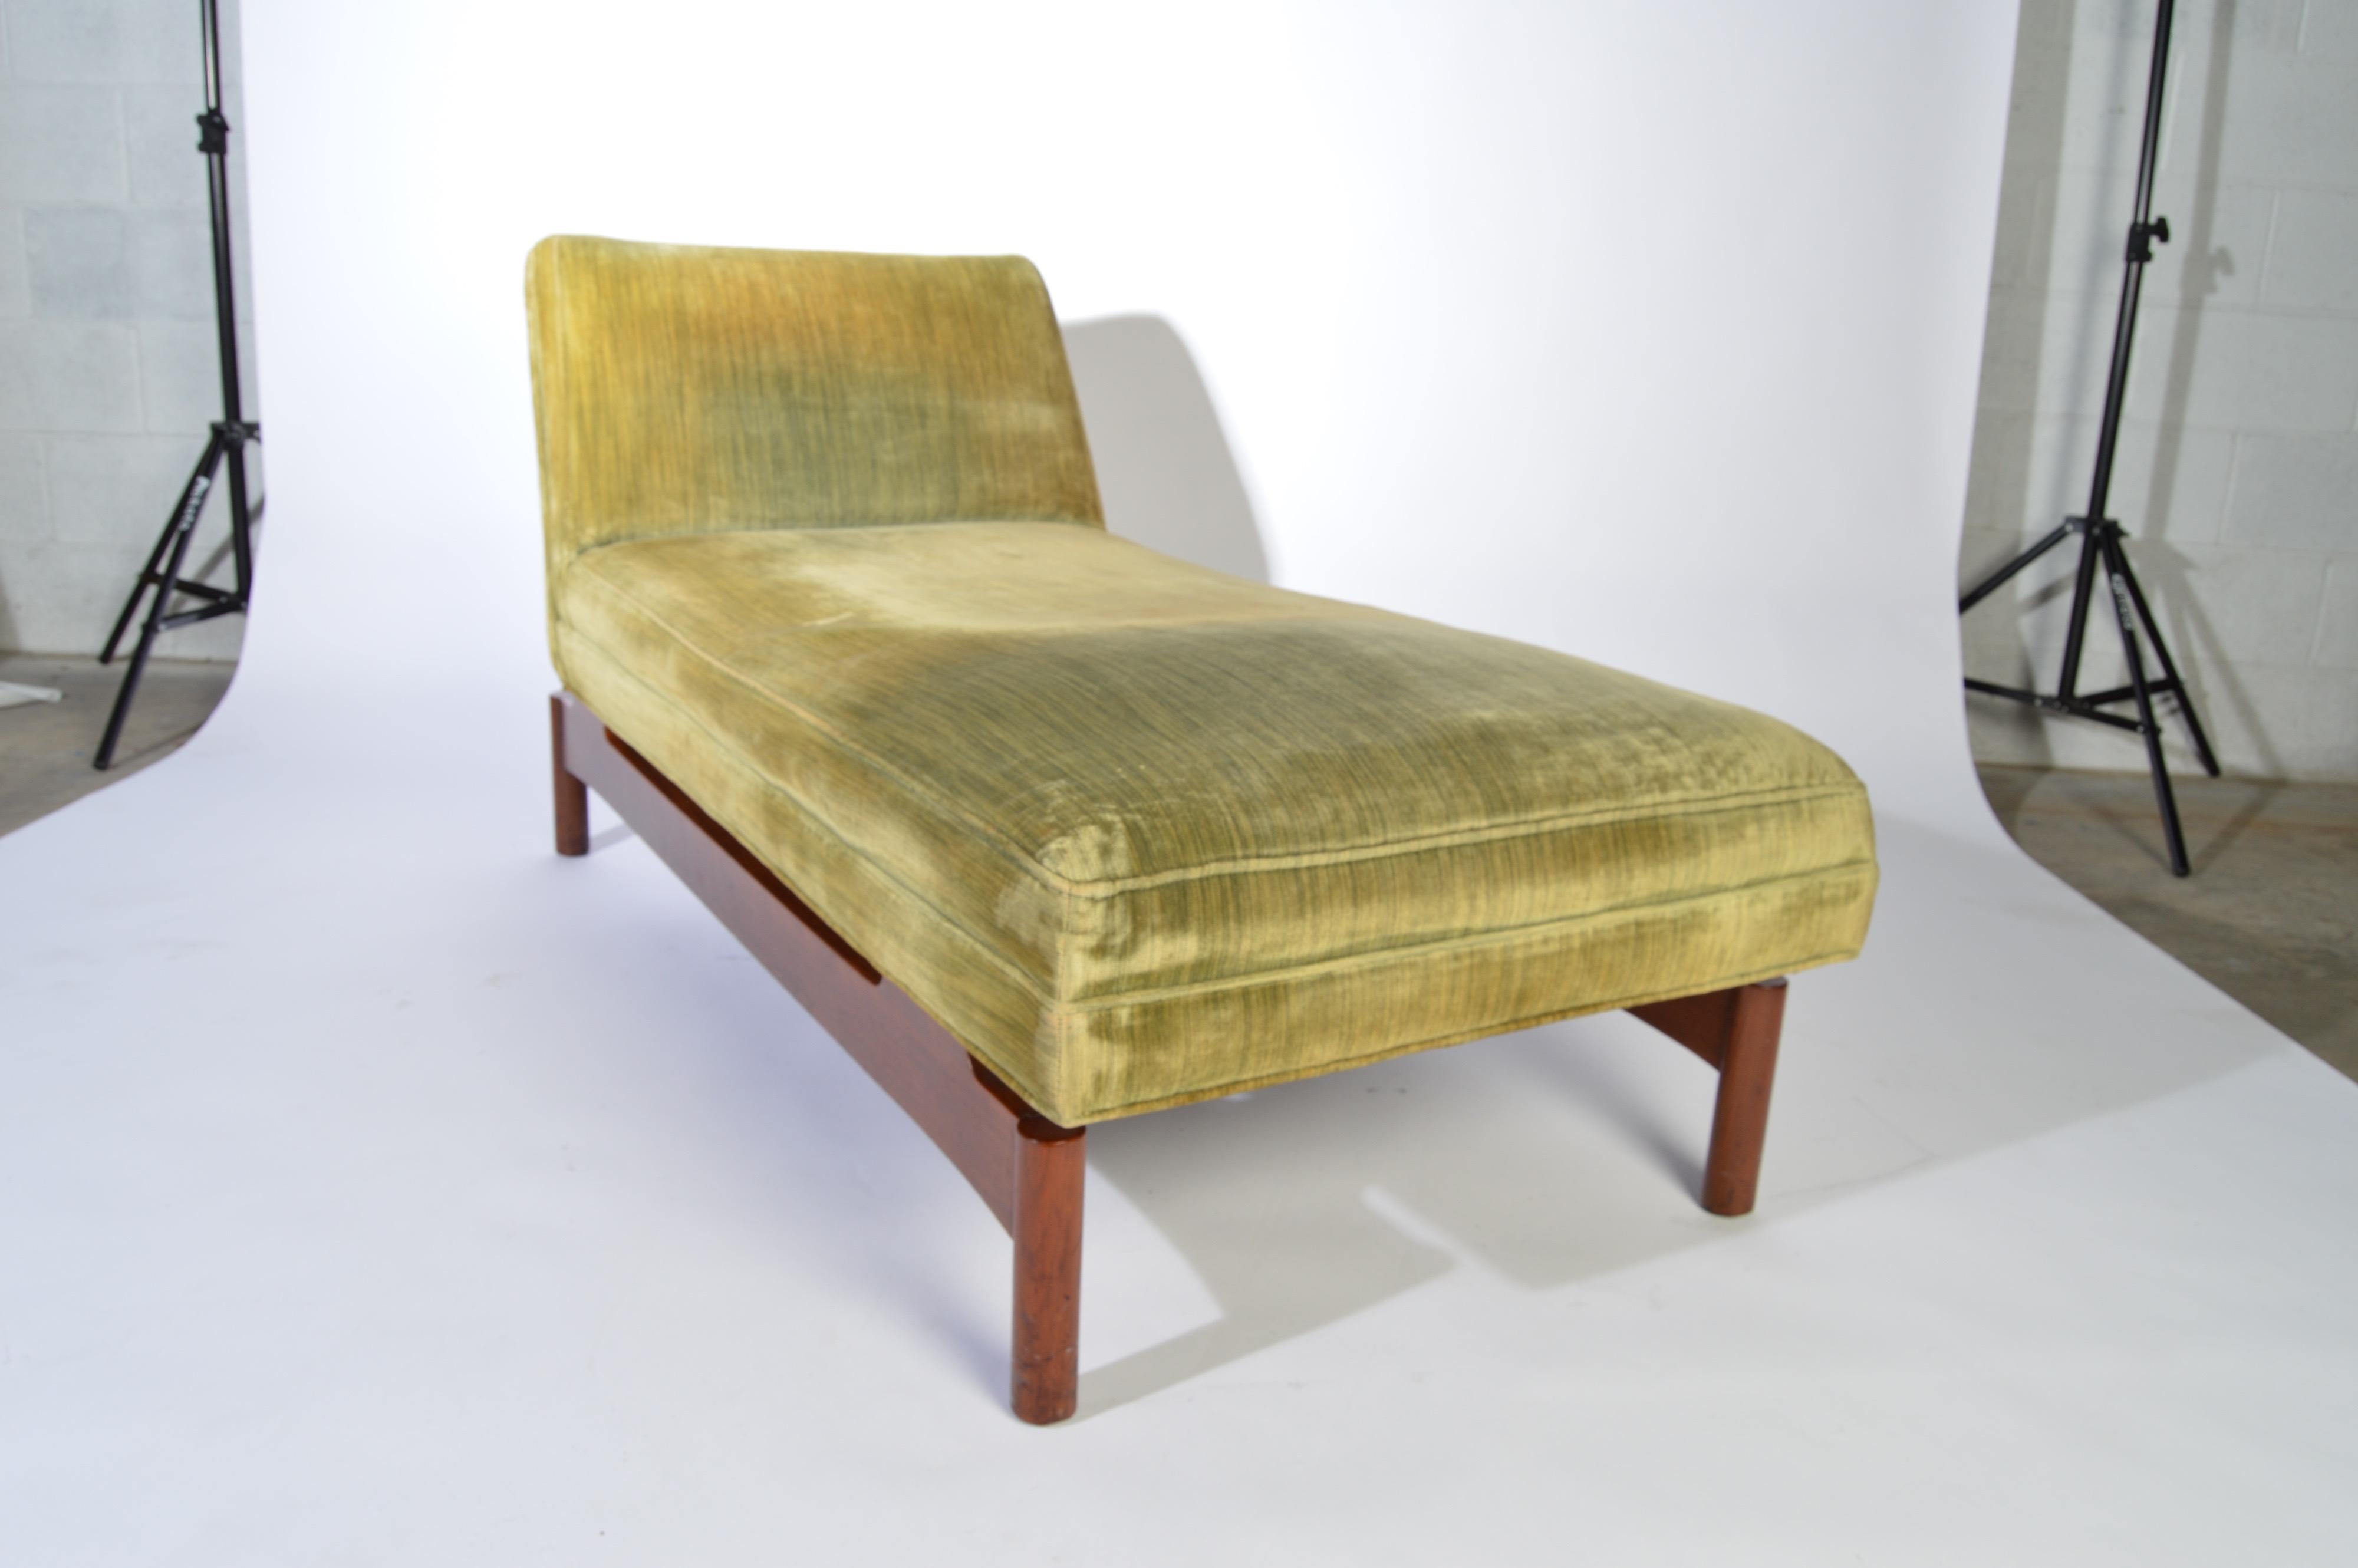 American Important Gerald Luss for Lehigh Chaise Lounge Chair in Walnut, circa 1950